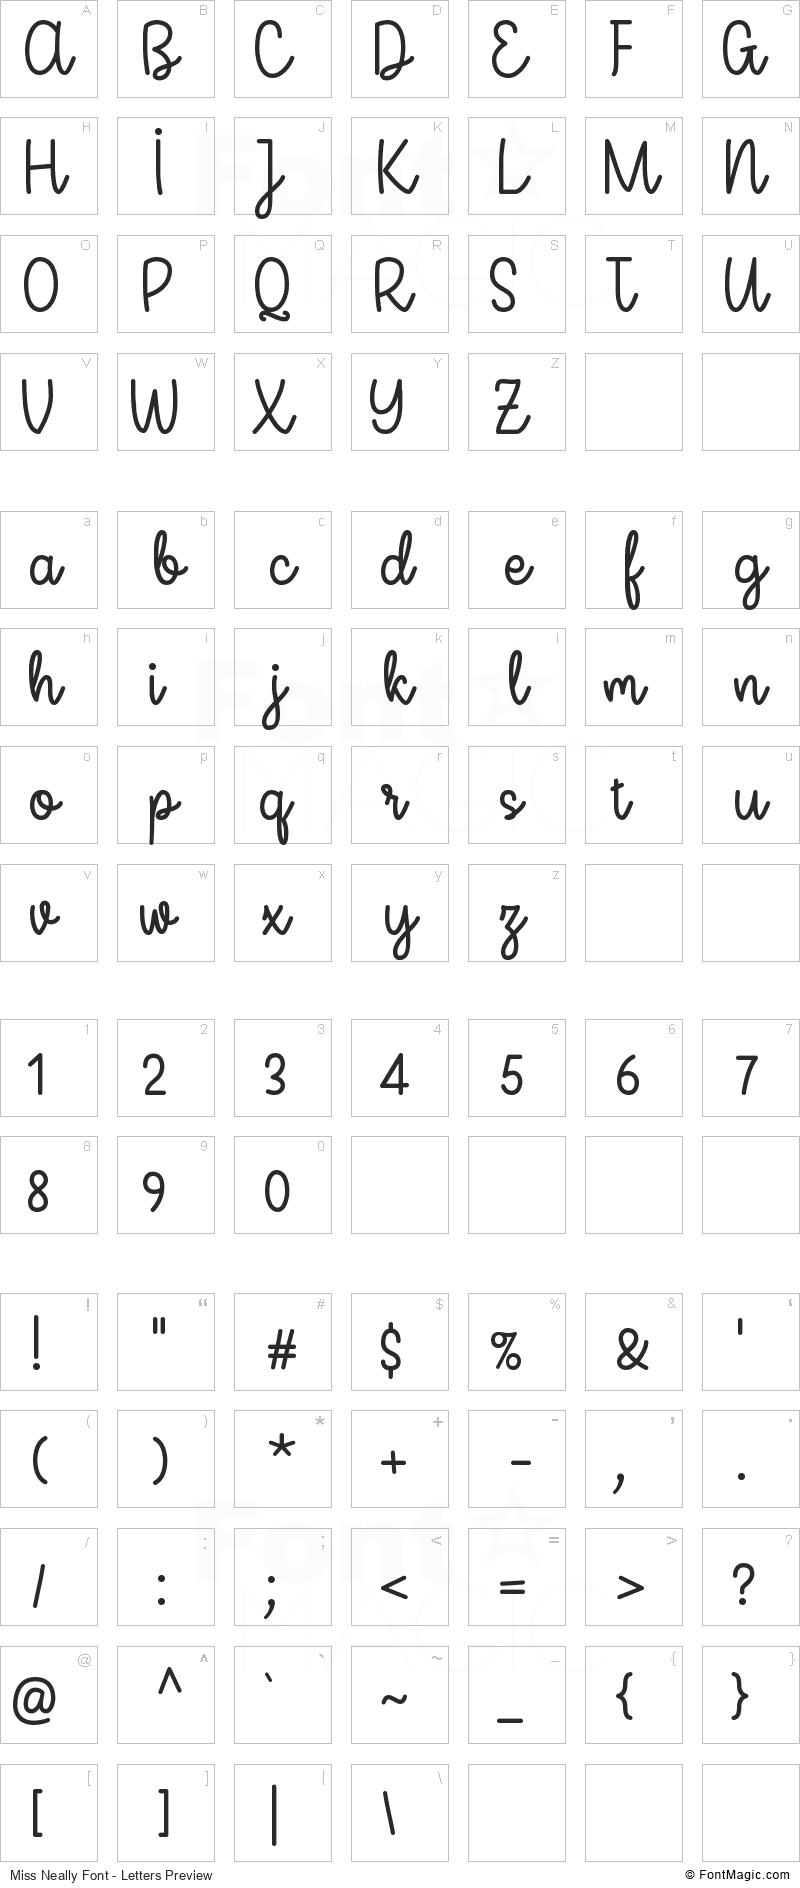 Miss Neally Font - All Latters Preview Chart